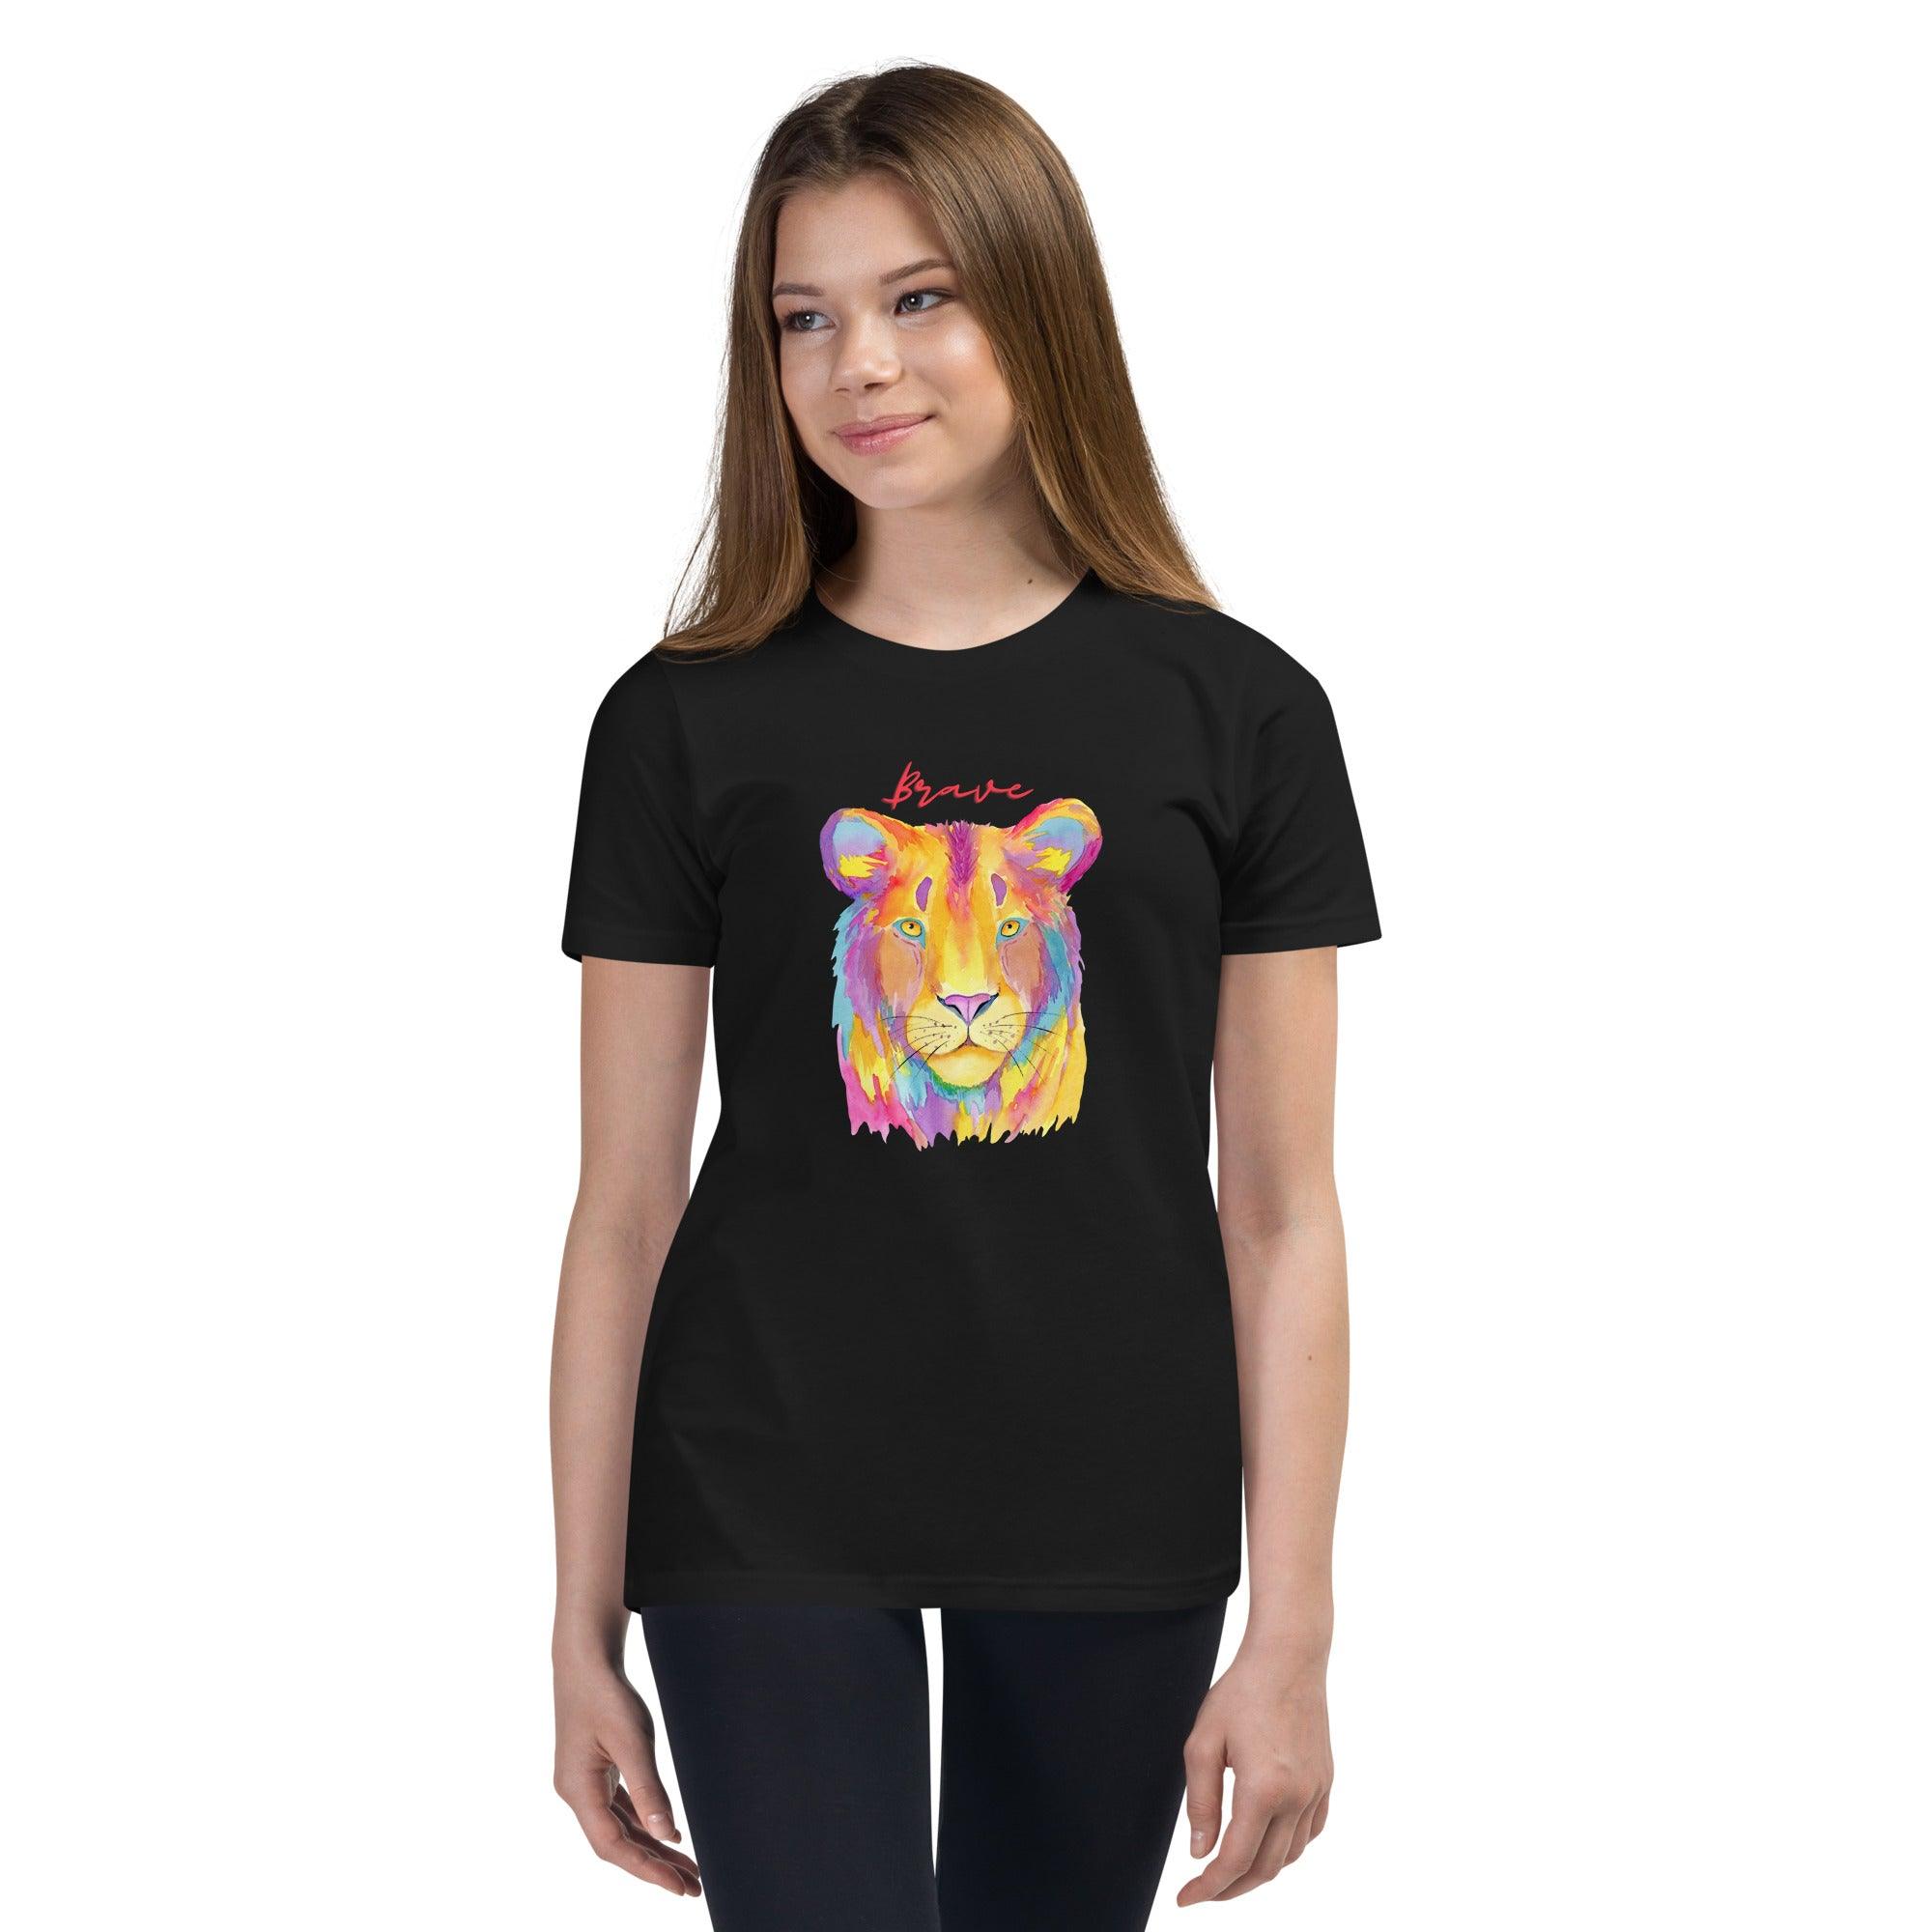 Brave Like A Lion Youth Short Sleeve T-Shirt - Affirm Effect